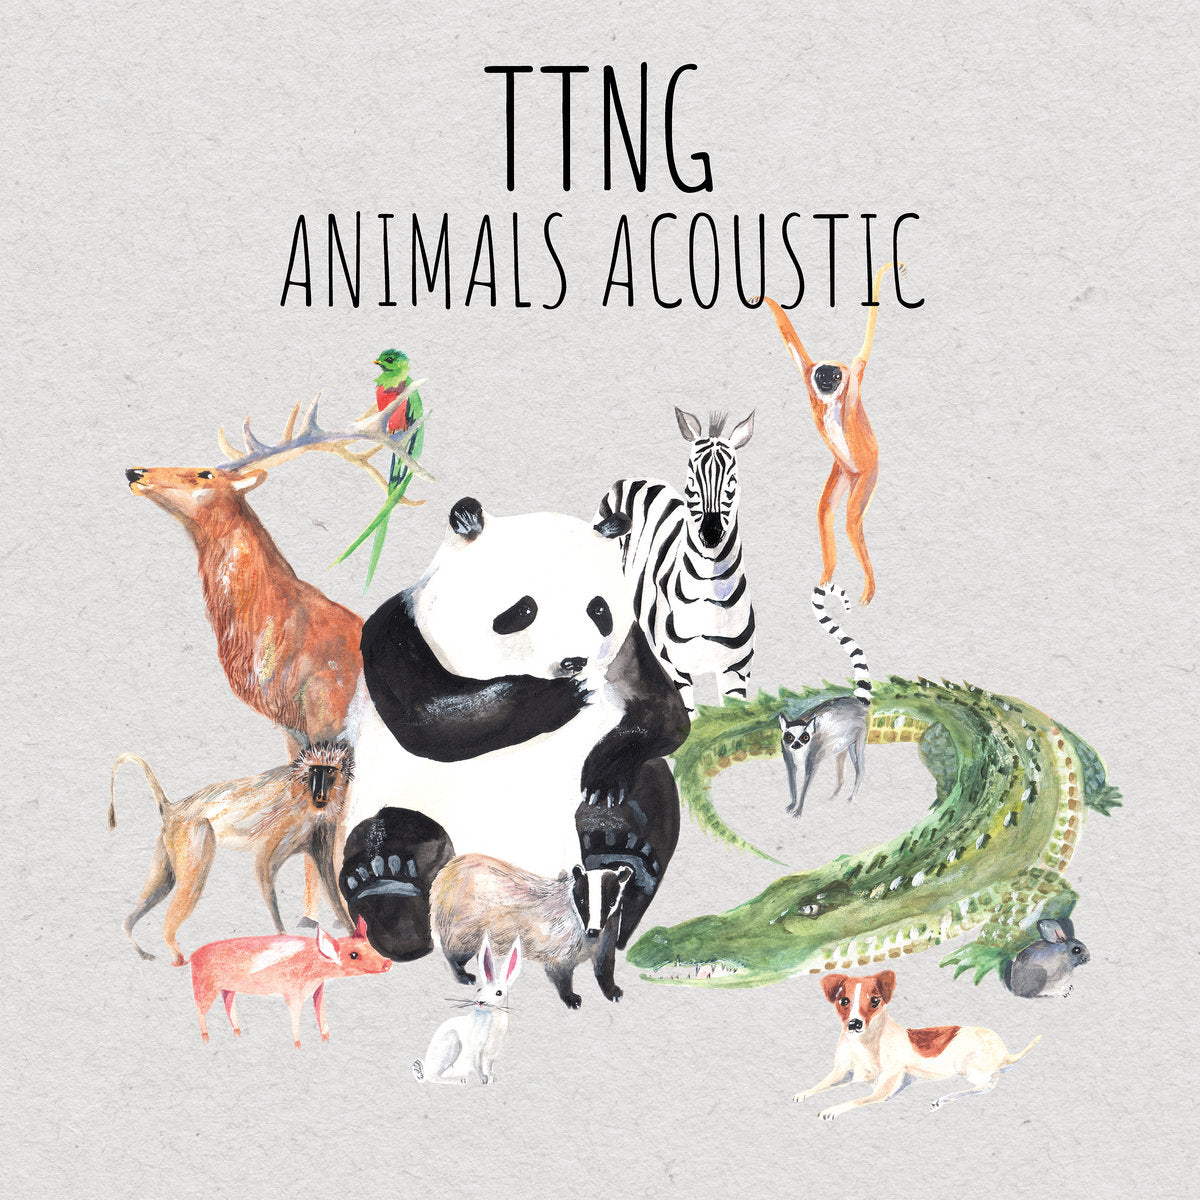 TTNG "Animals - Acoustic" CD